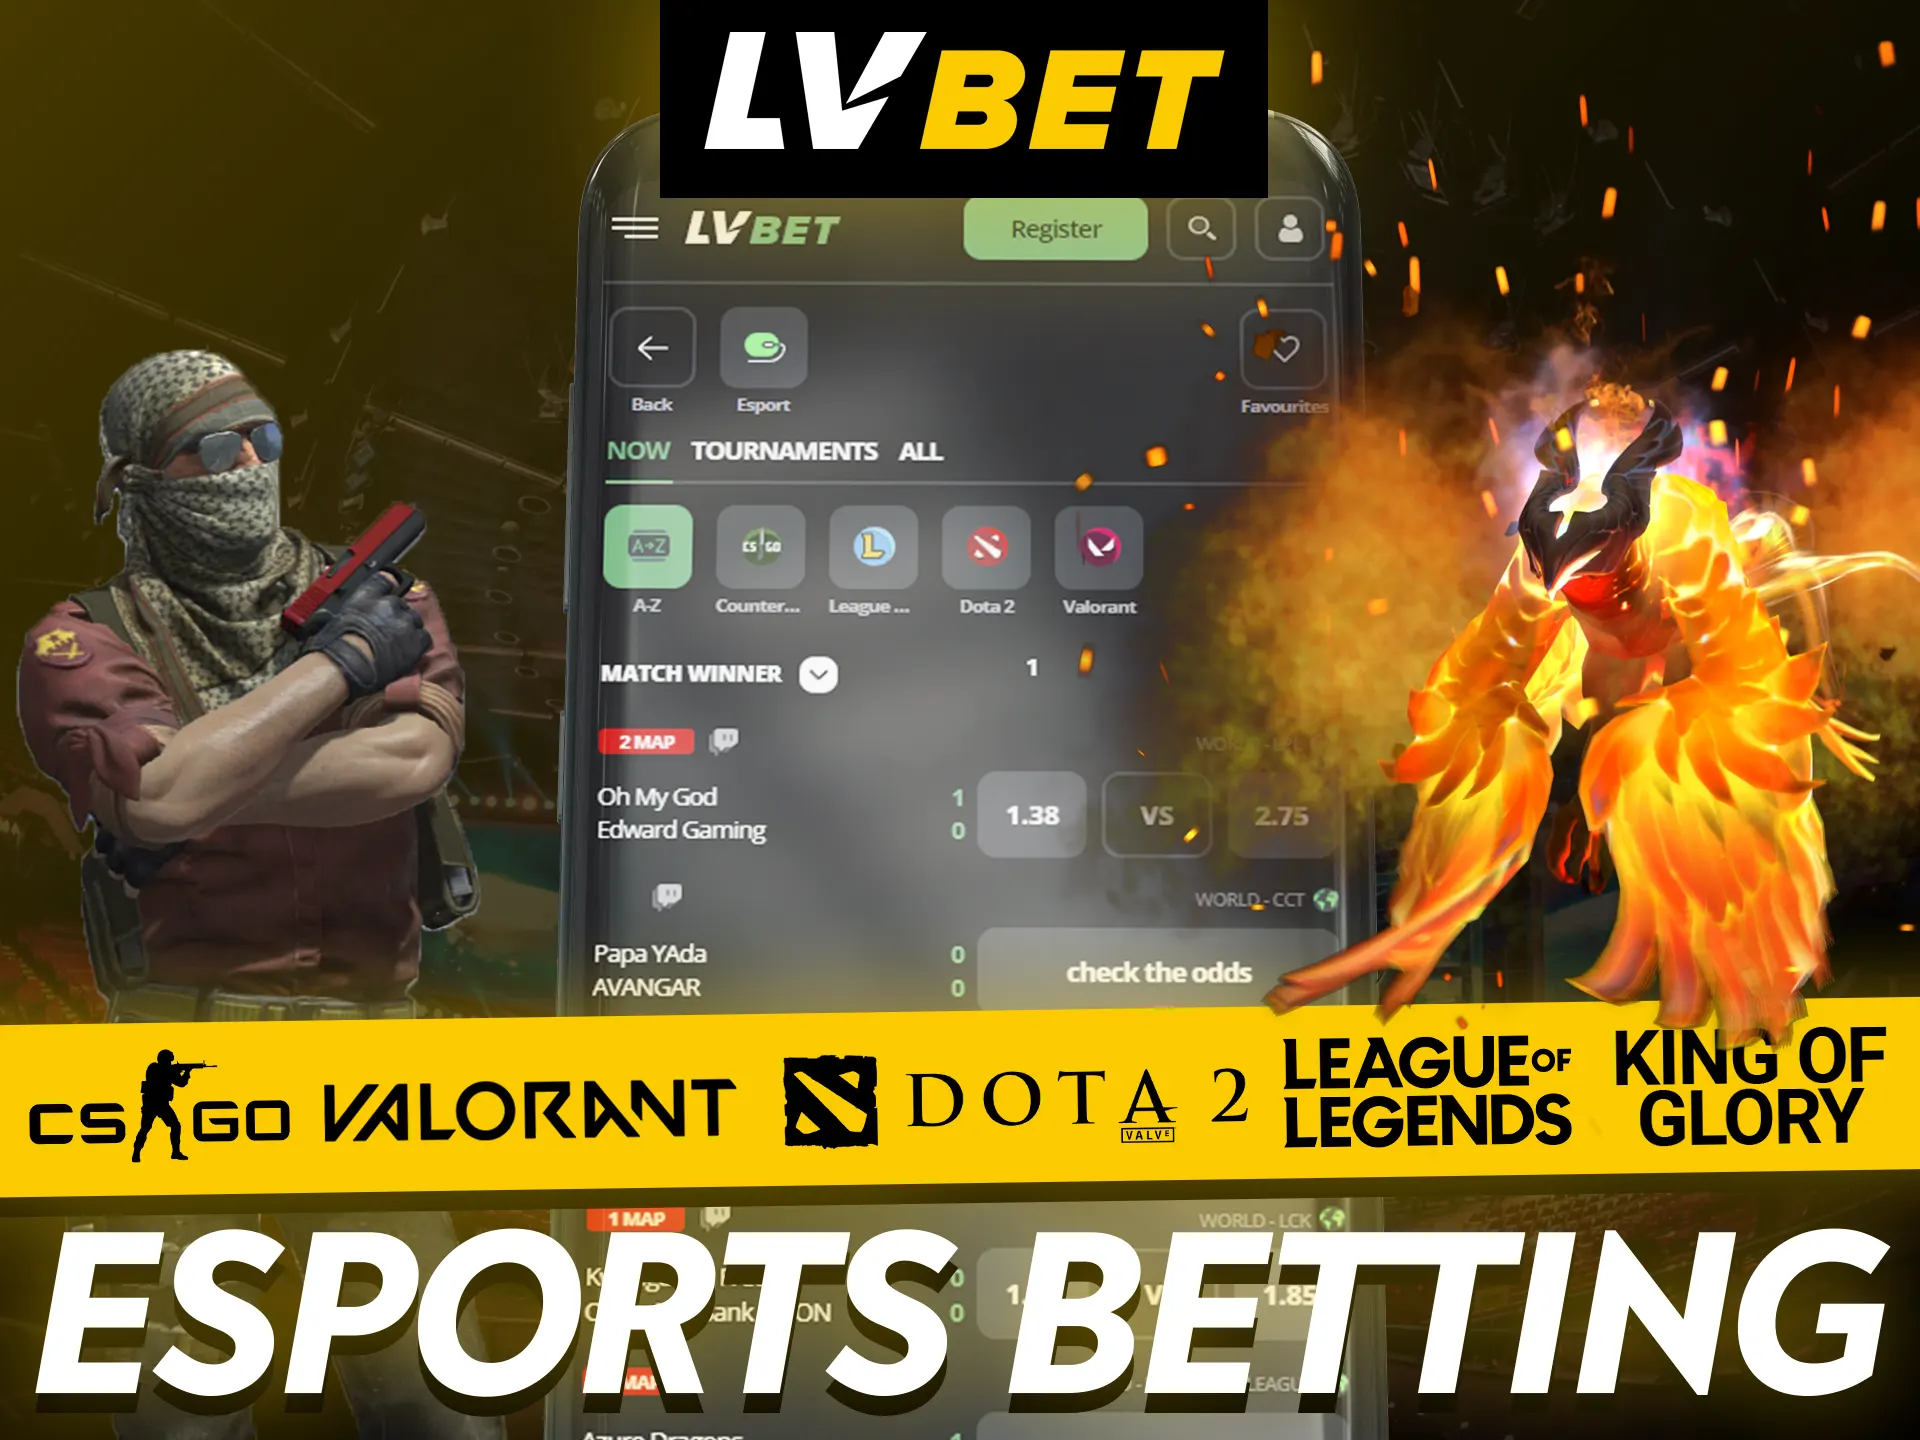 Bet on esports in the LV Bet app.